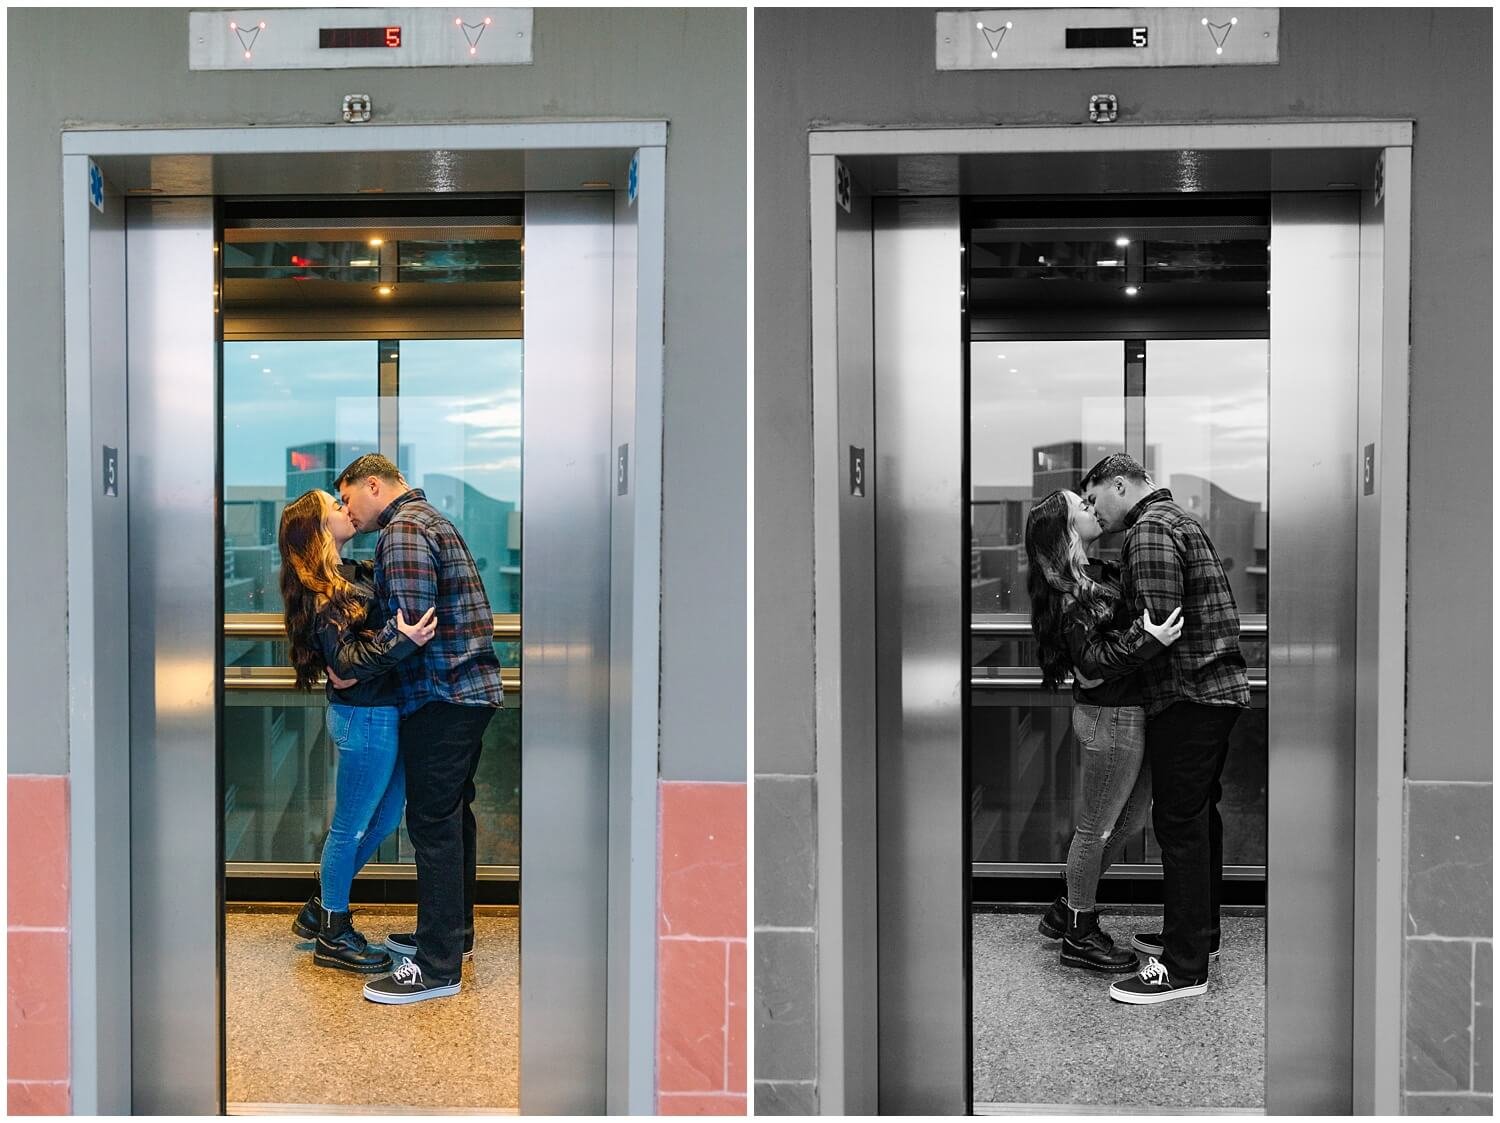 Couple Kissing in Elevator - image by GunnShot Photography